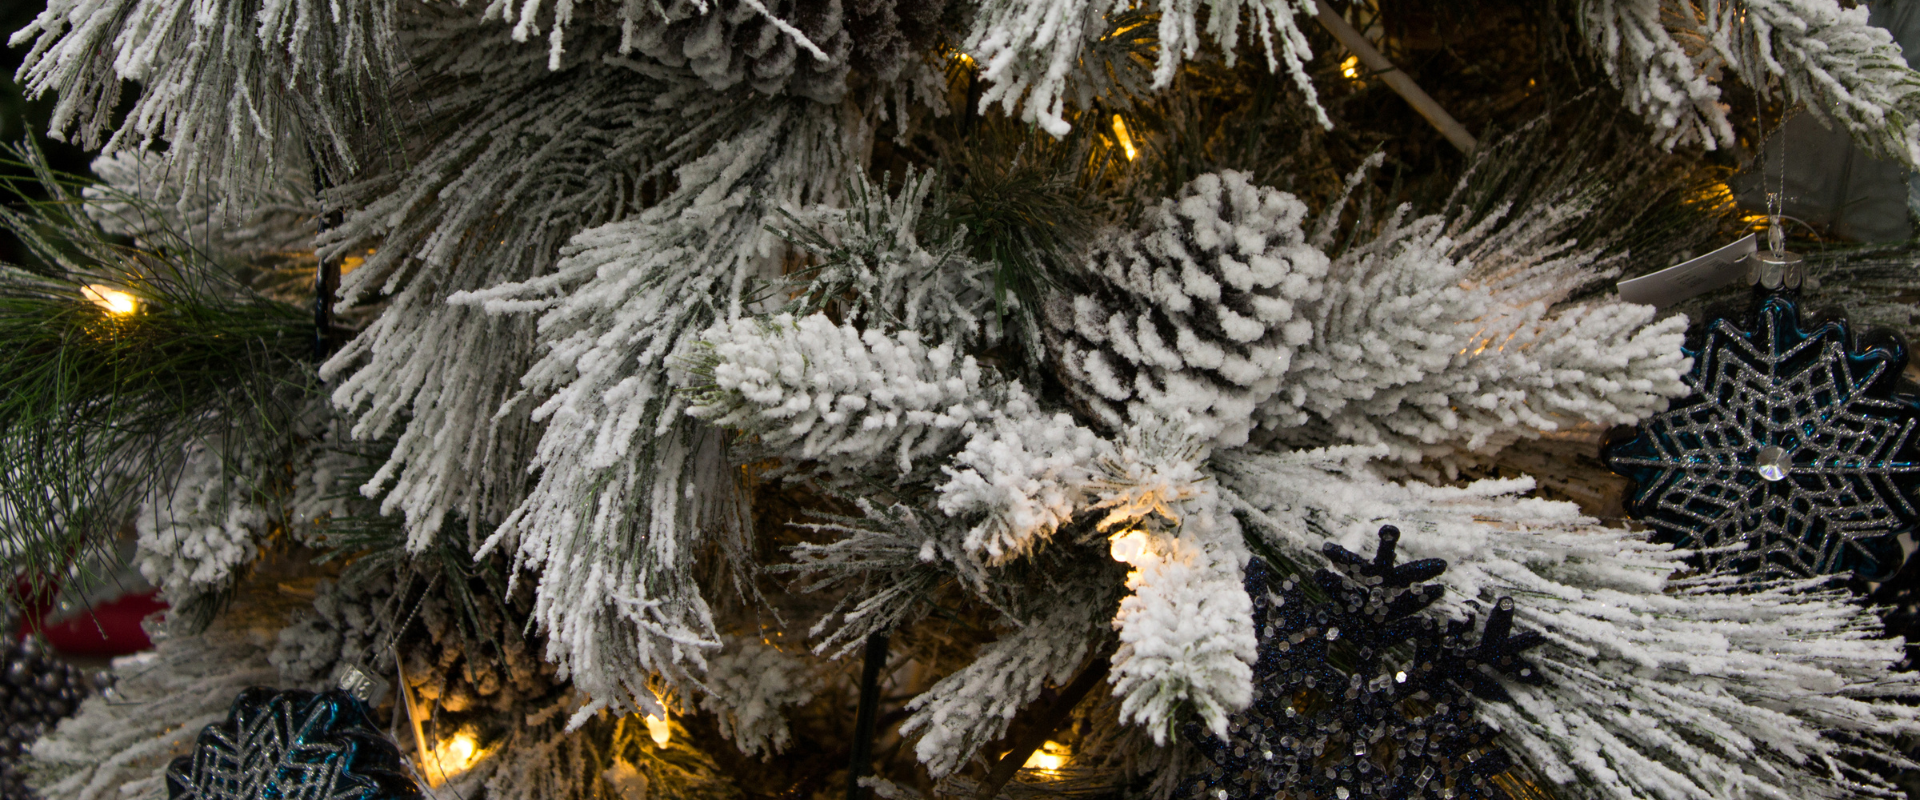 An artificial Christmas tree with decorative snow and lights